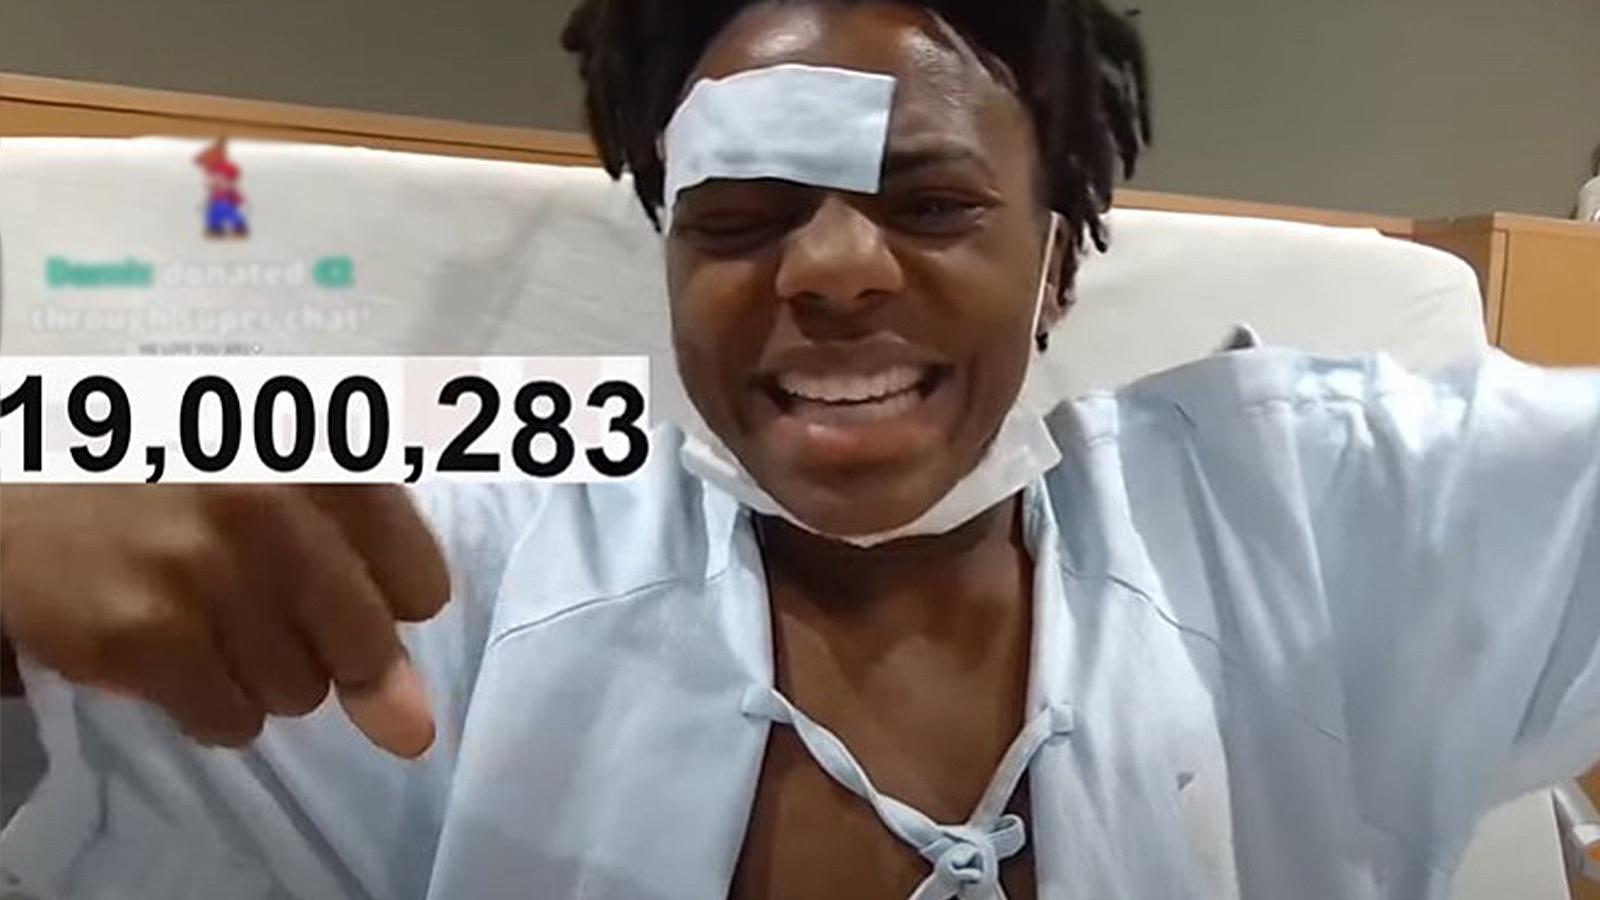 IShowSpeed Streams From Hospital For His Big Milestone